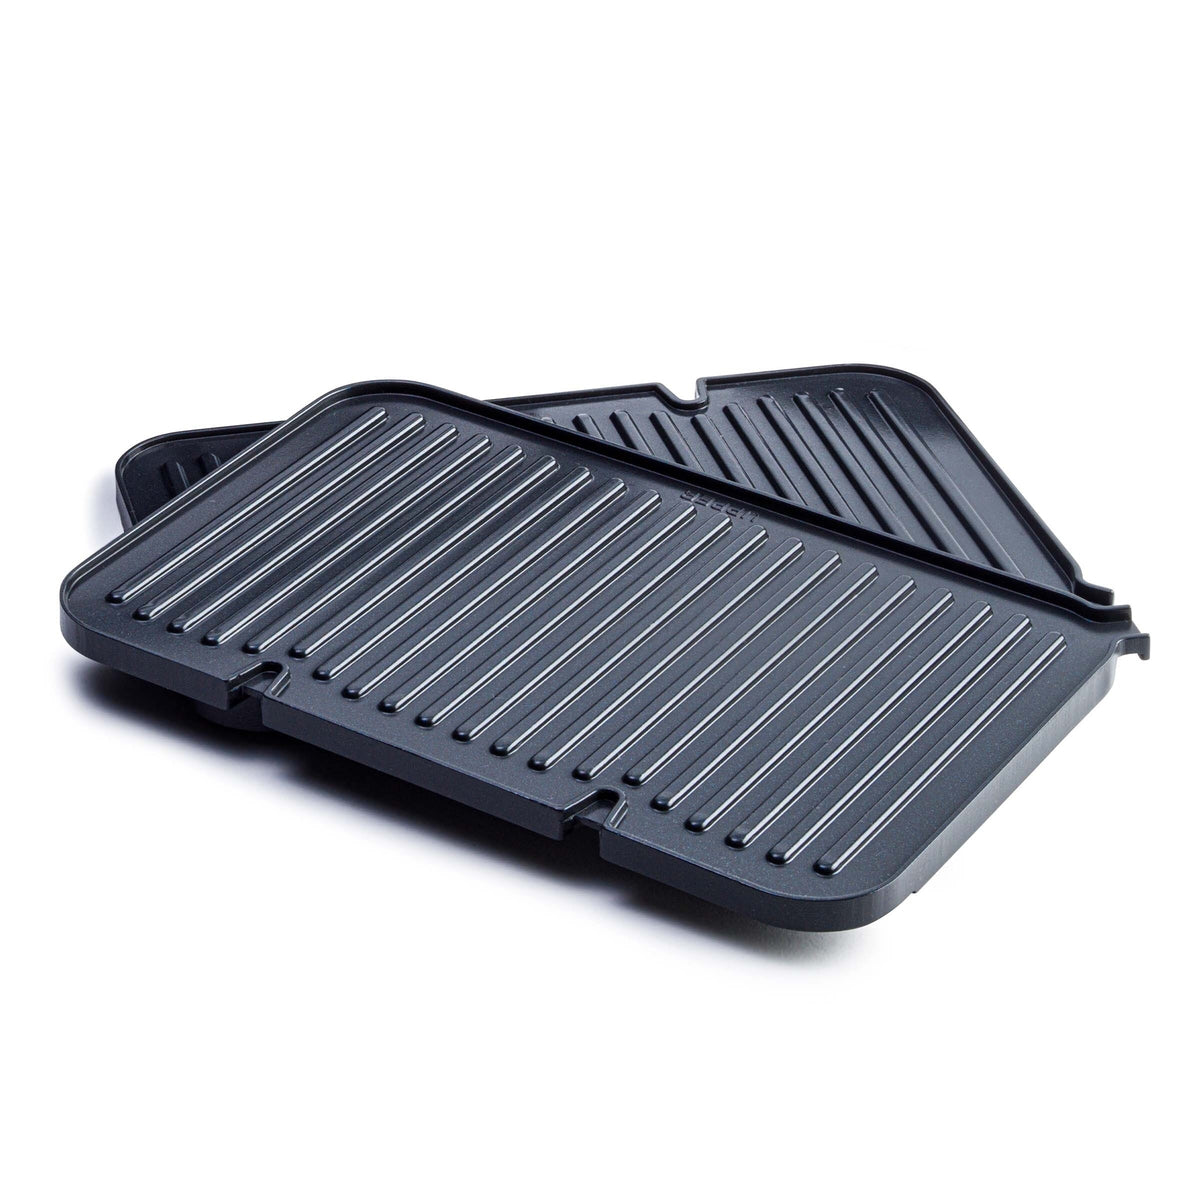 Blue Diamond Nonstick Sizzle Griddle Deluxe with Grill Plate Set